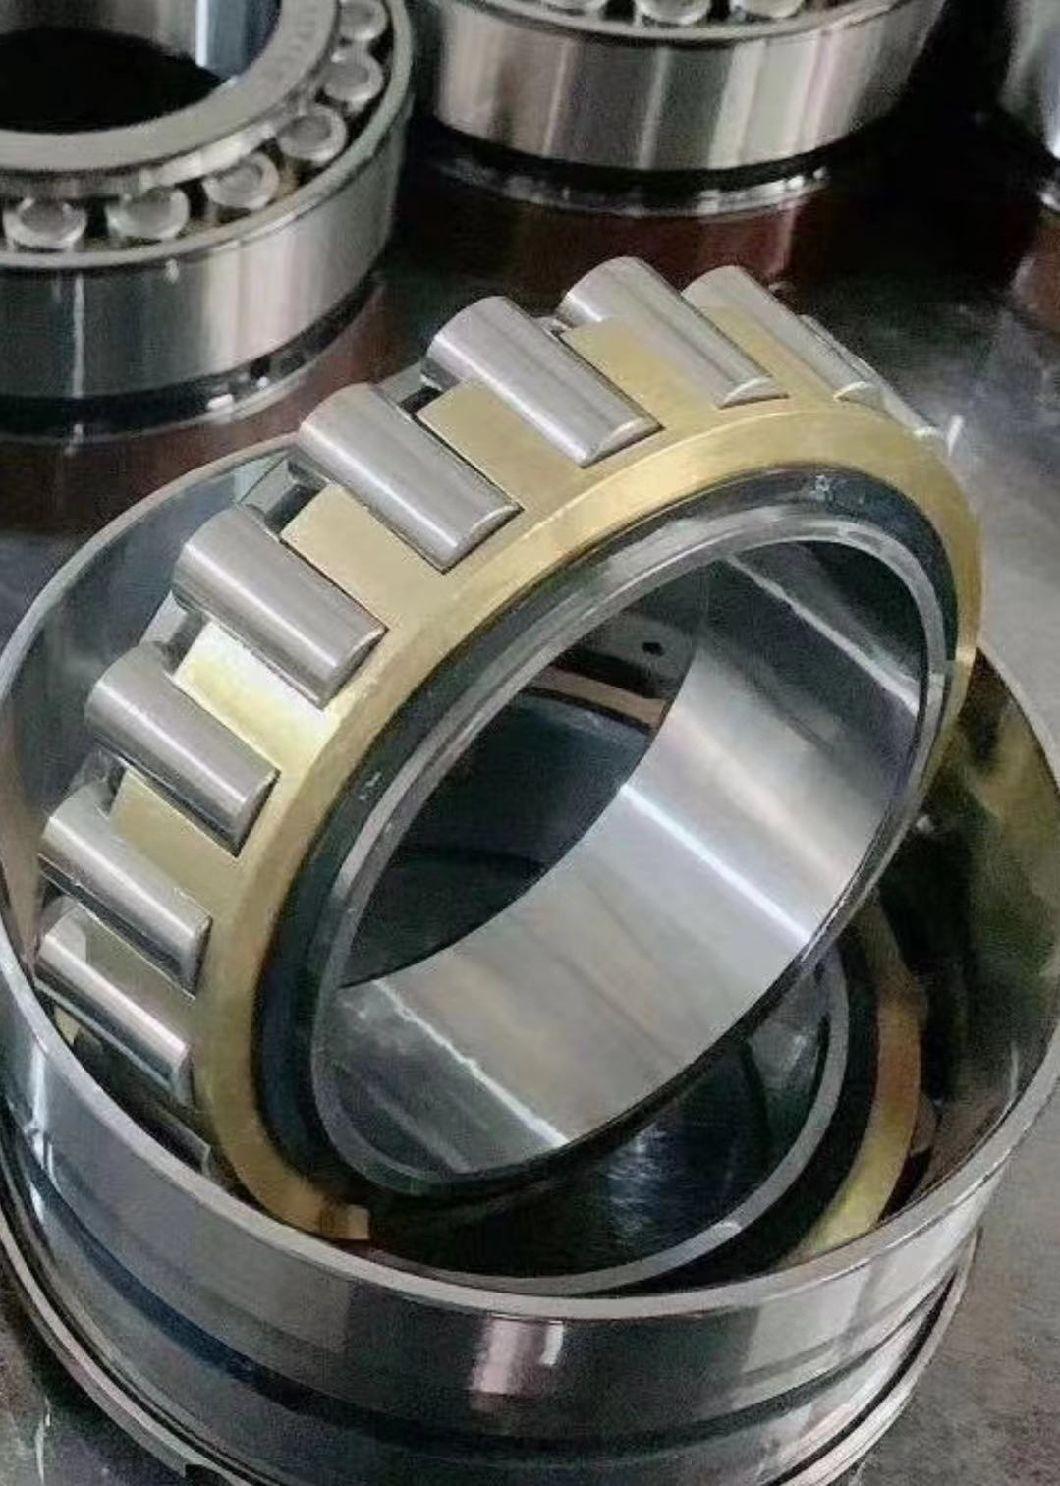 Tapered Roller Bearing 31318